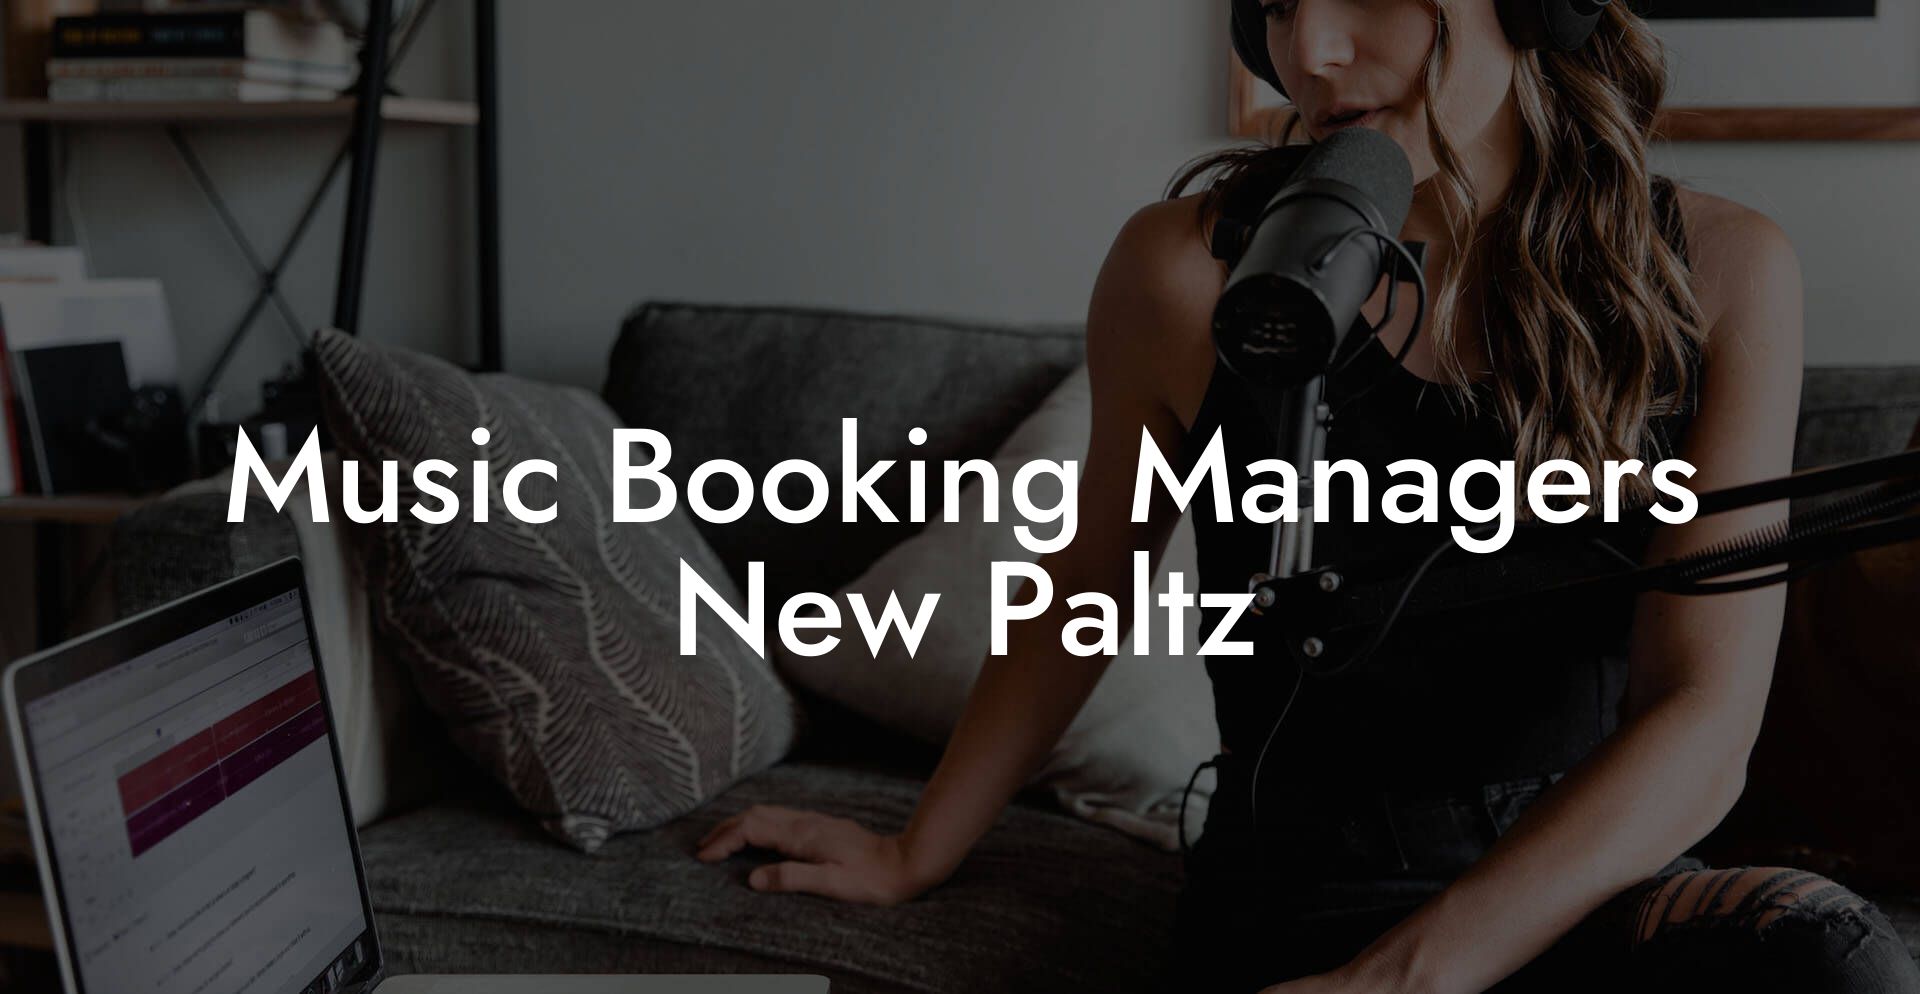 Music Booking Managers New Paltz